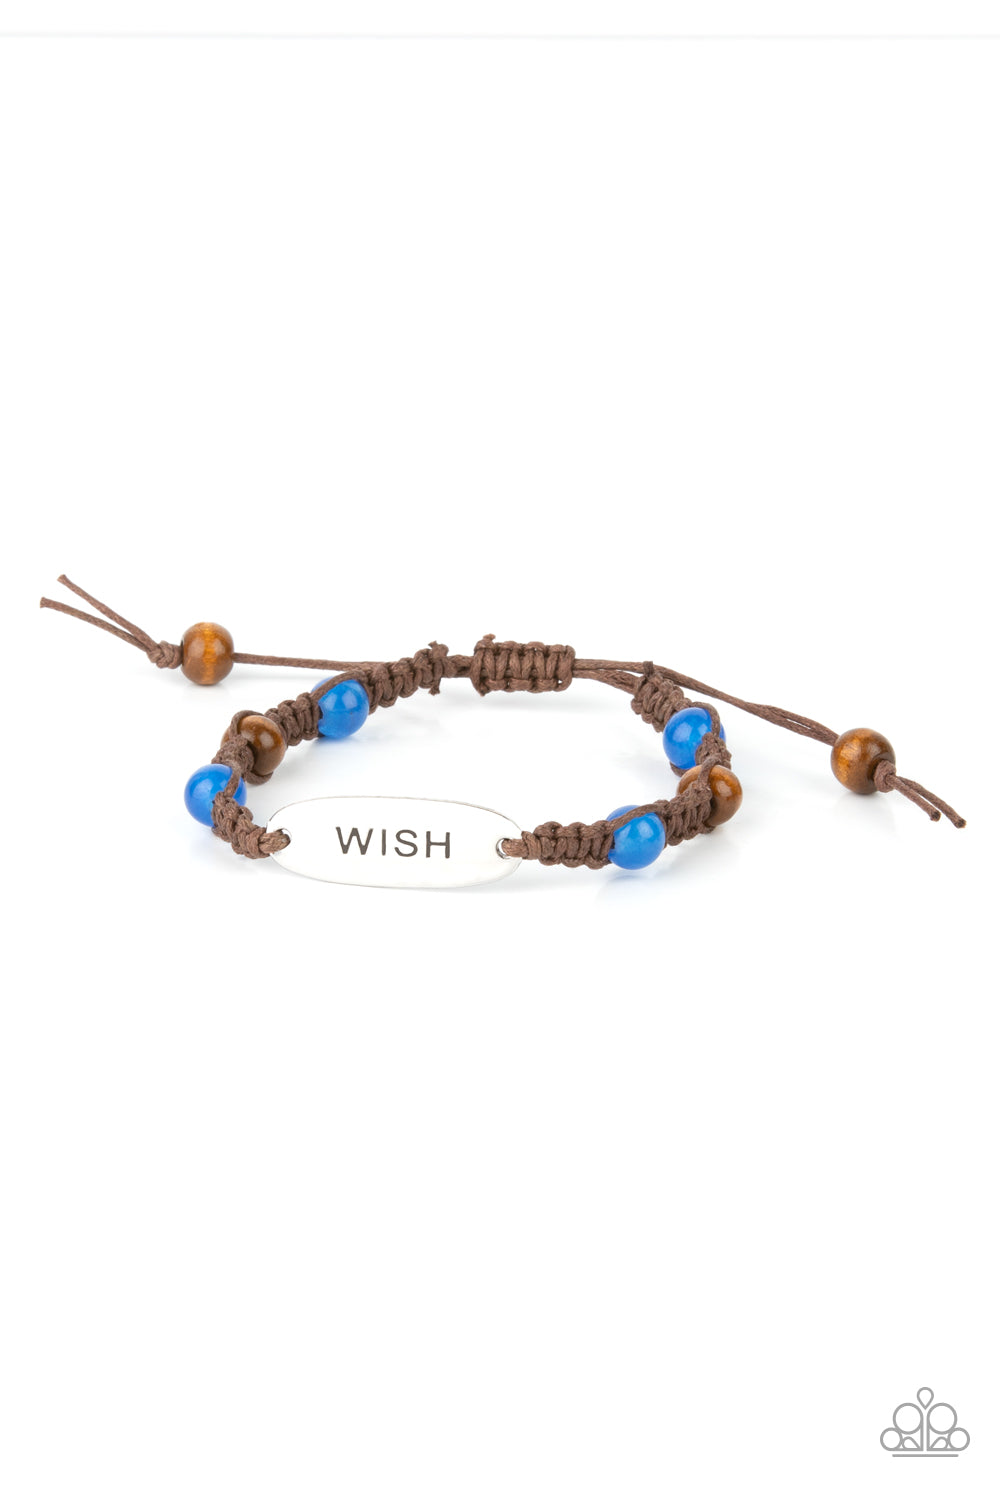 WISH THIS WAY - BLUE AND BROWN INSPIRATIONAL URBAN DRAW STRING BRACELET